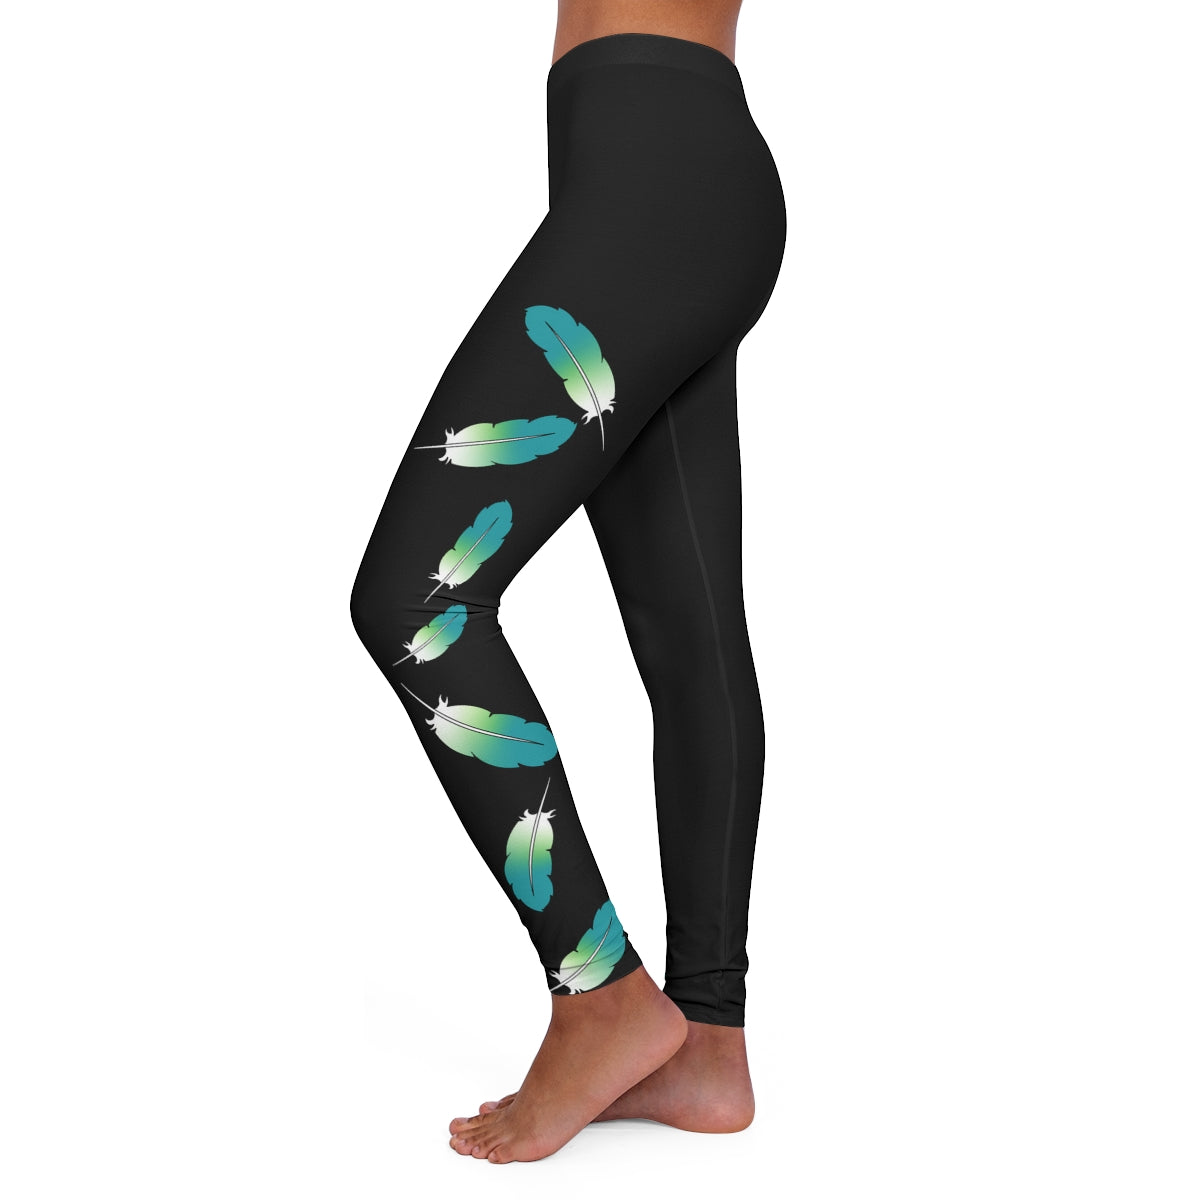 Feather Leggings - Blue Green Feathers